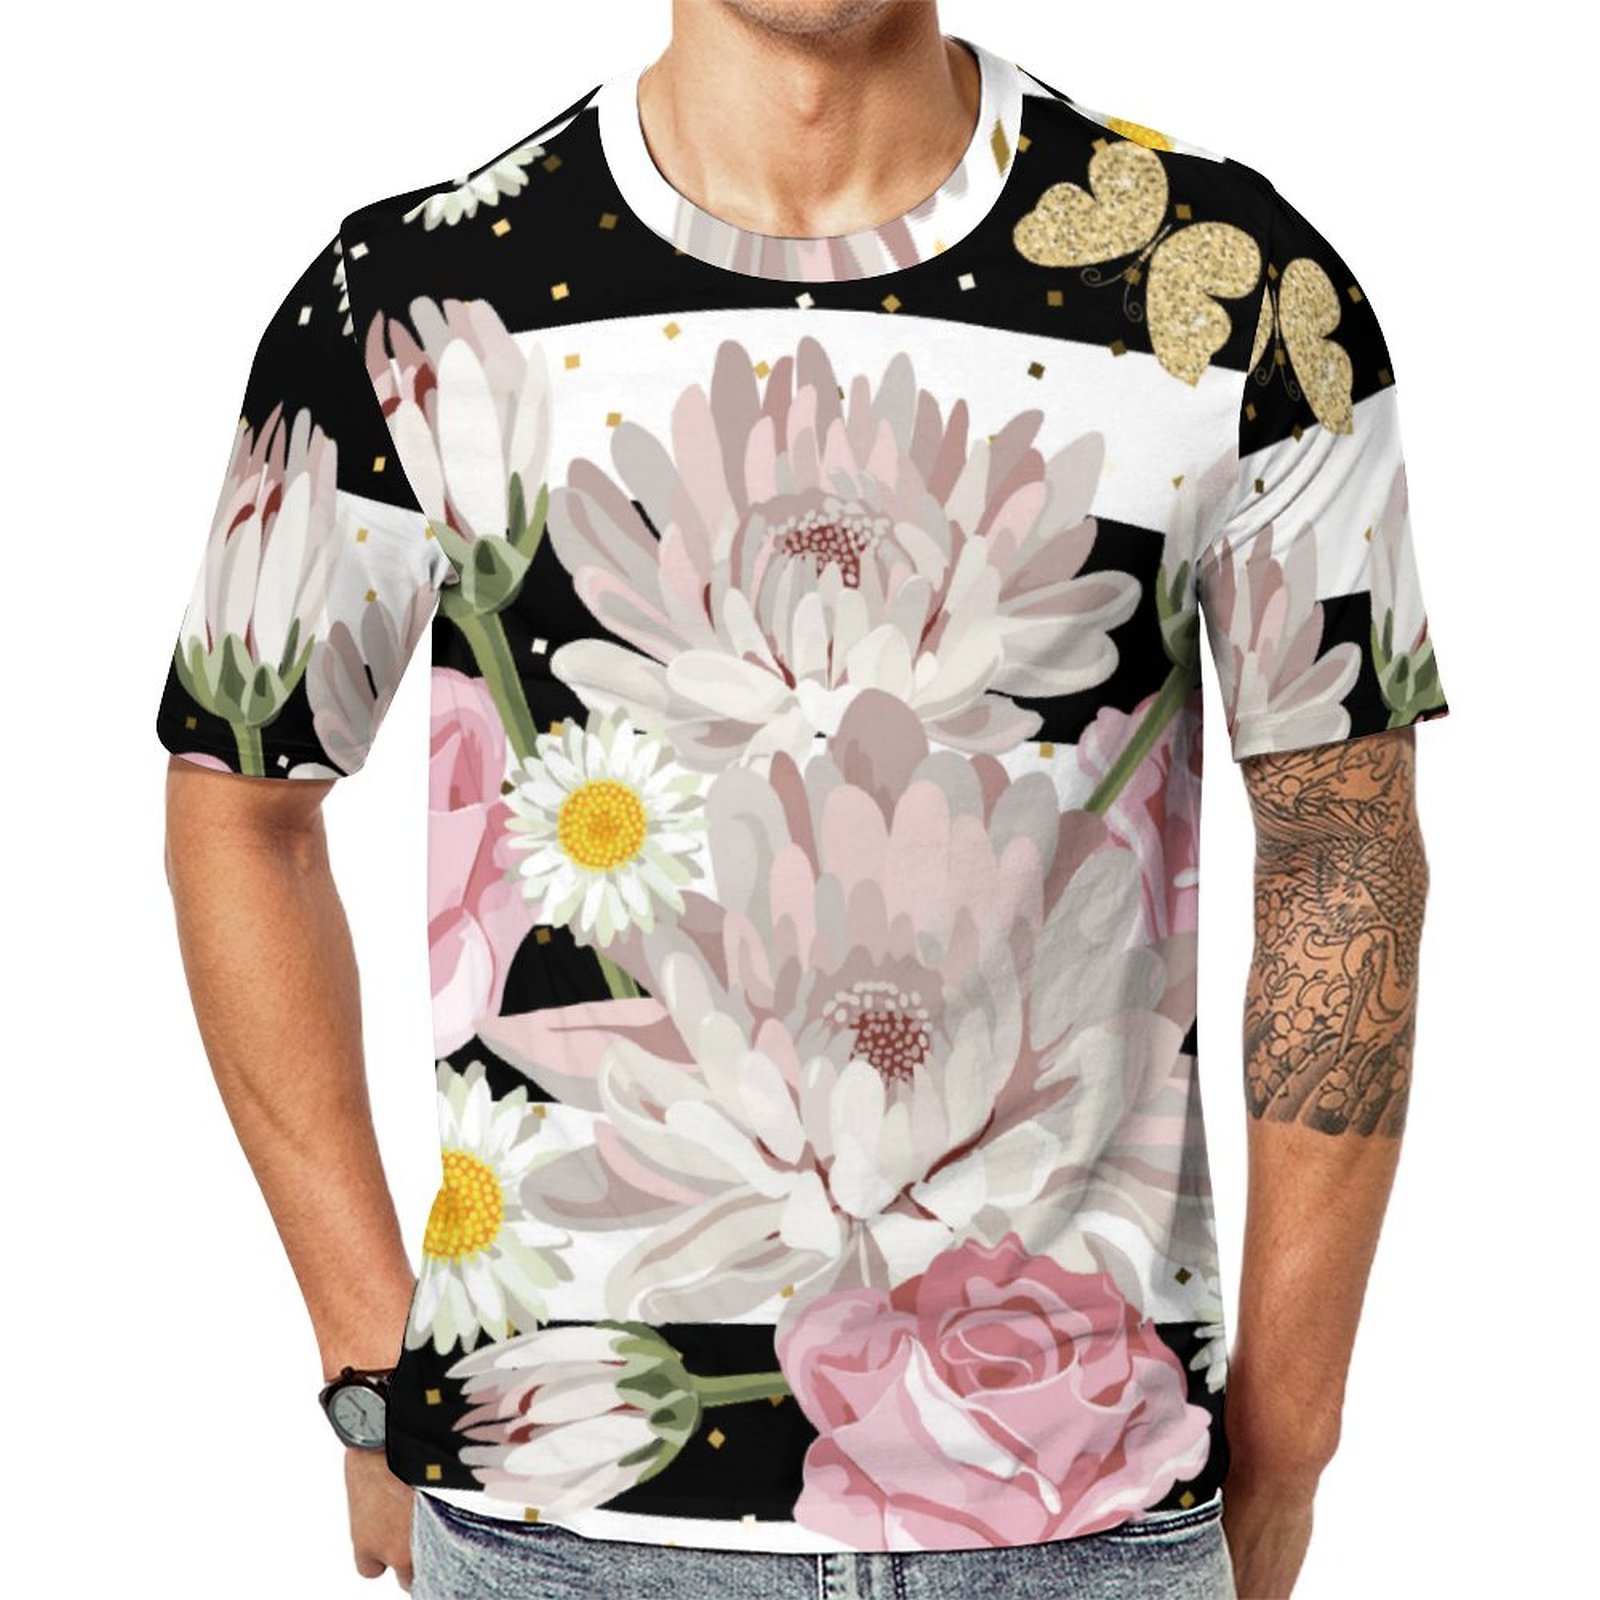 Gold Butterflies Roses Daisies Floral Striped Short Sleeve Print Unisex Tshirt Summer Casual Tees for Men and Women Coolcoshirts